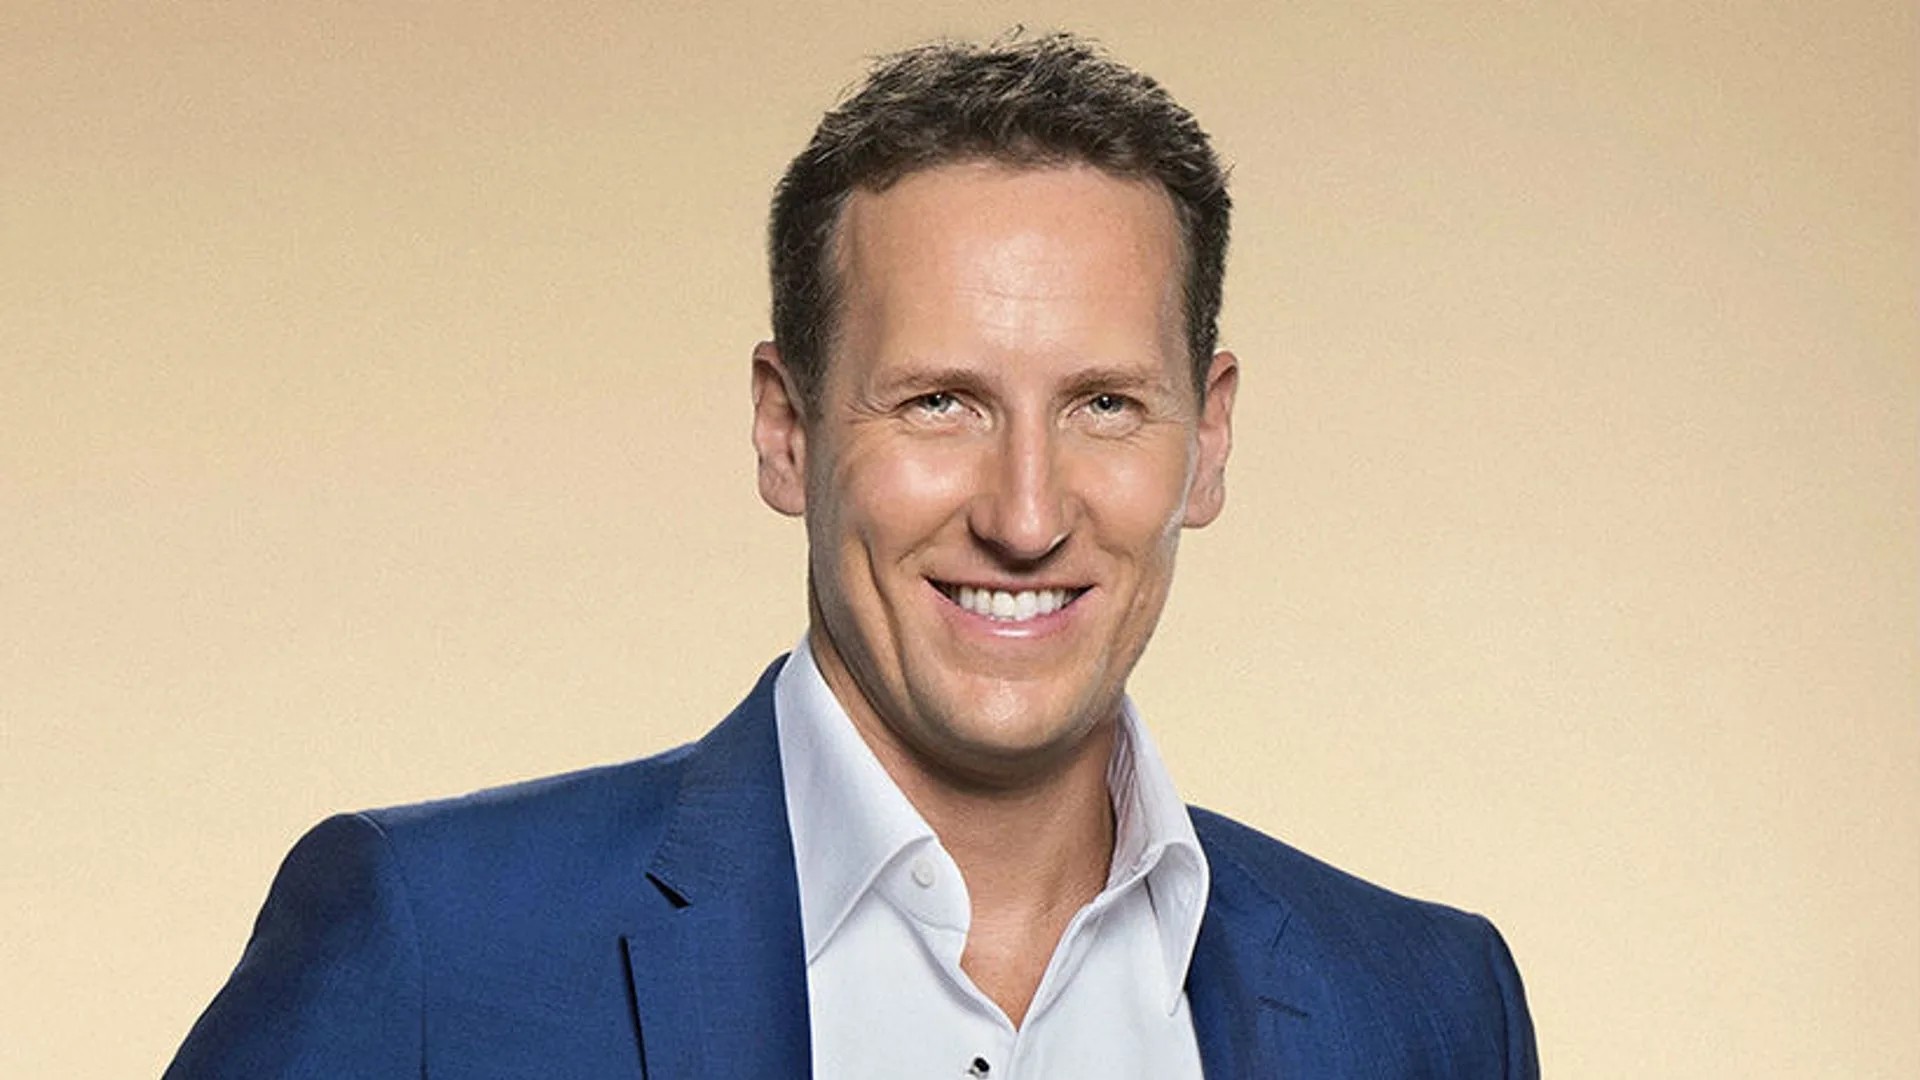 8 Intriguing Facts About Brendan Cole - Facts.net